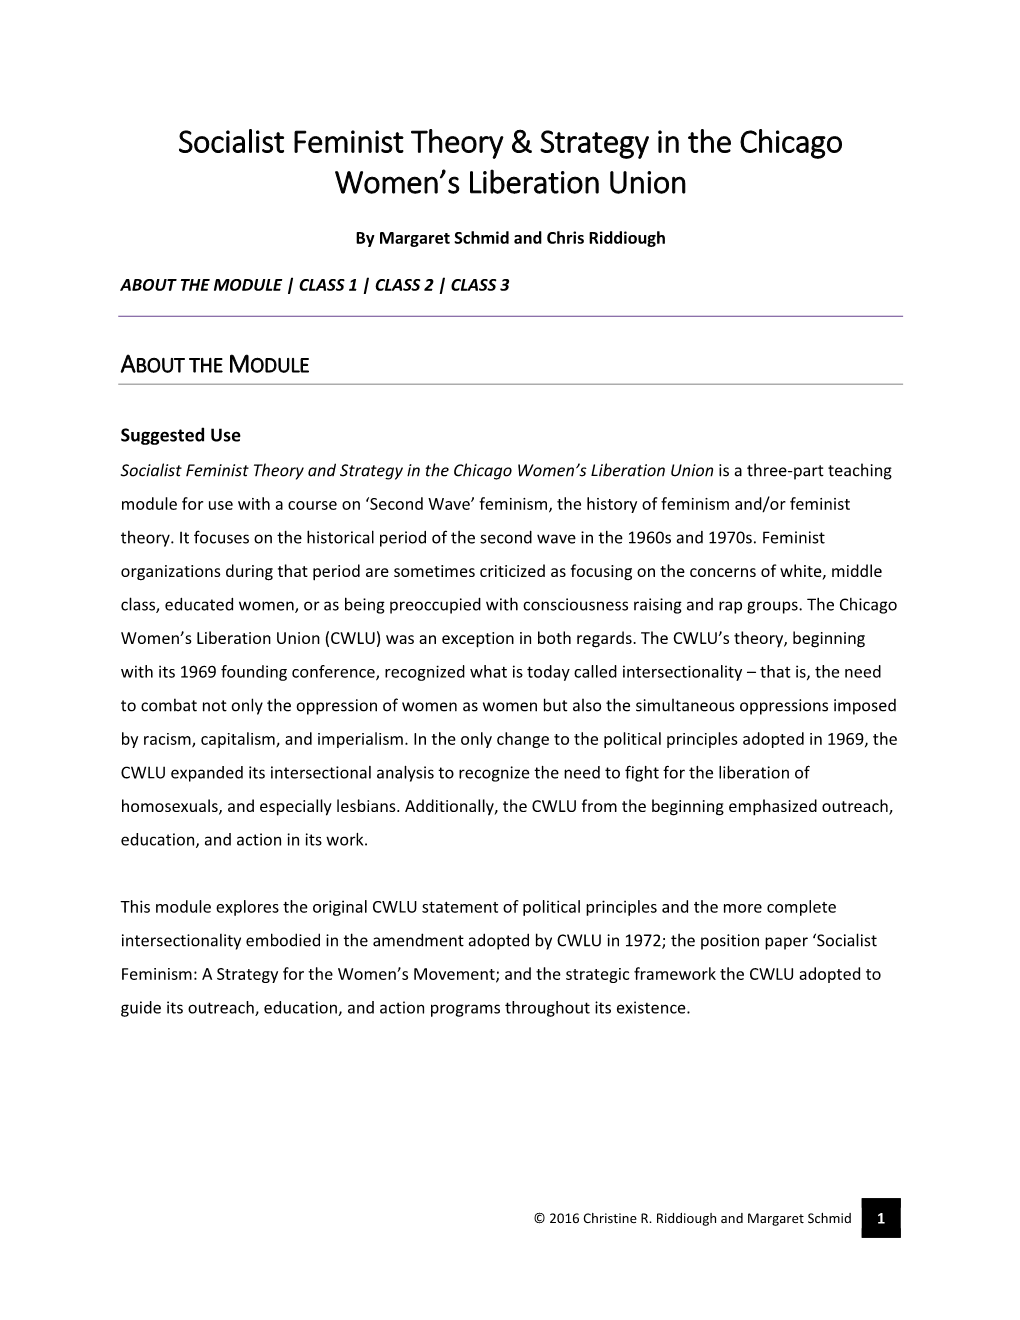 Socialist Feminist Theory & Strategy in the Chicago Women's Liberation